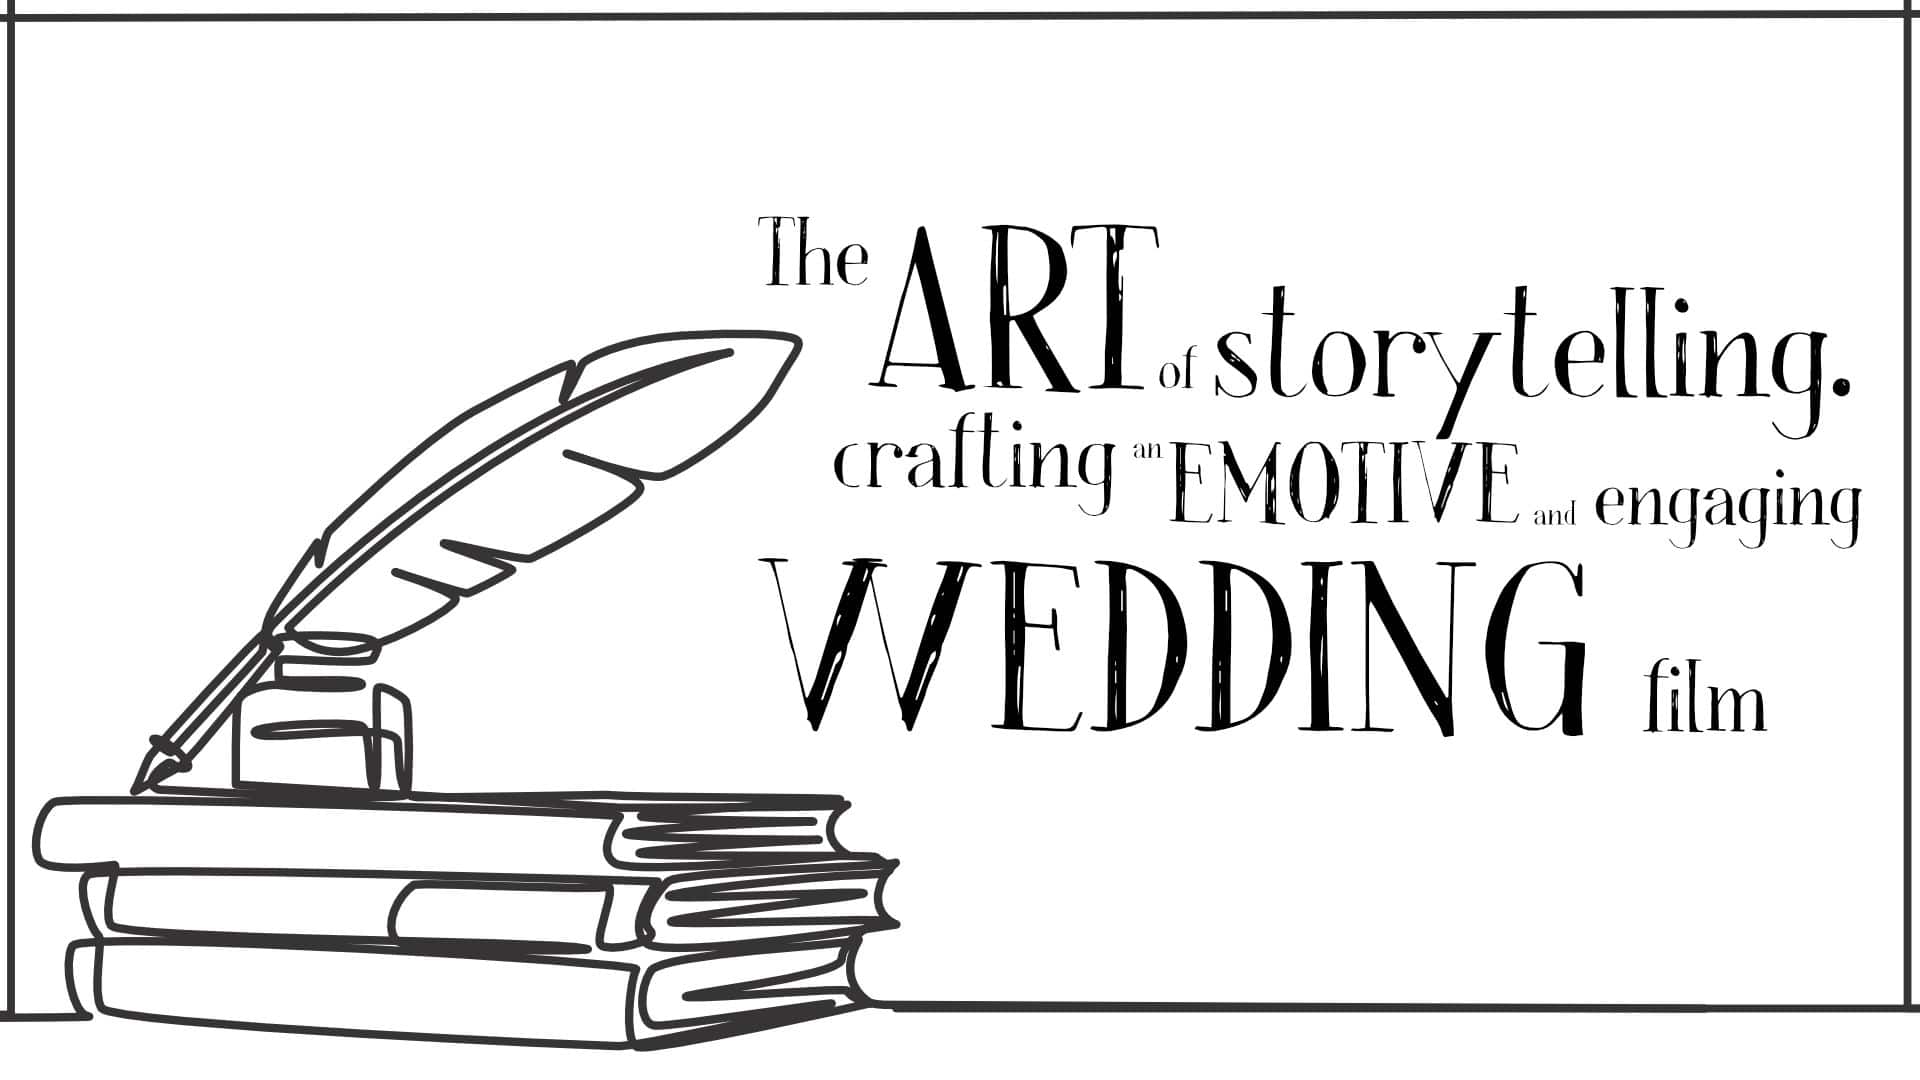 The art of storytelling crafting an emotive and engaging wedding film